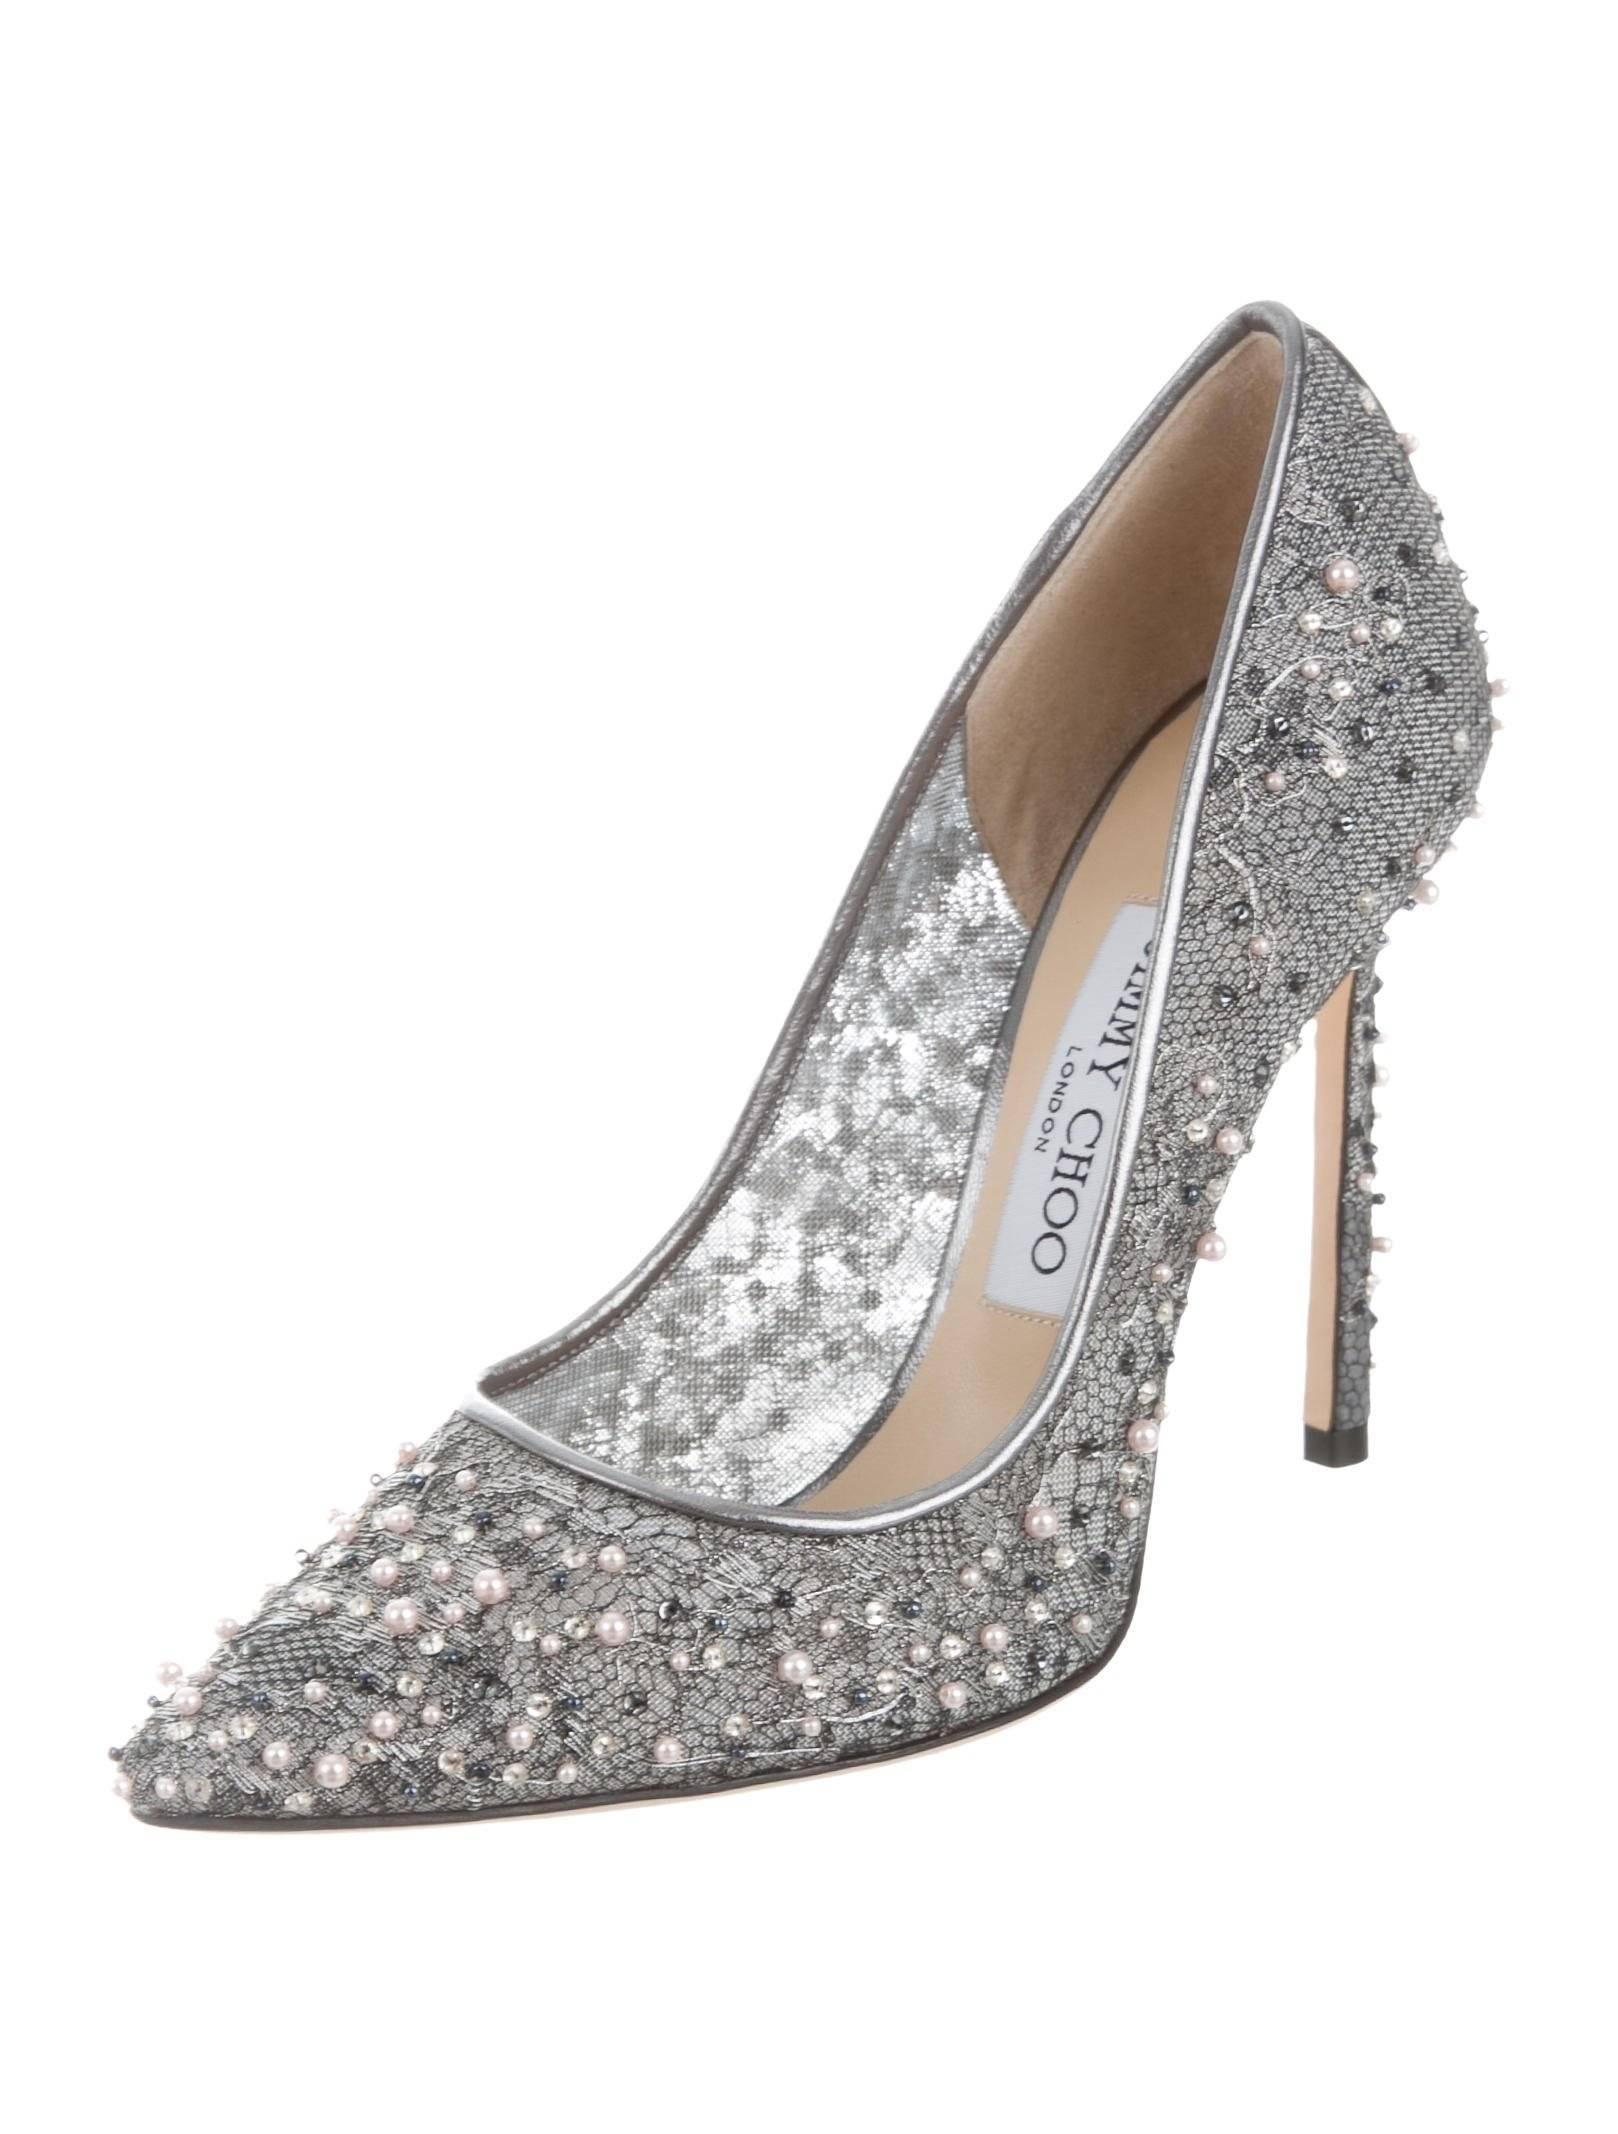 CURATOR'S NOTES

LAST PAIR!  Jimmy Choo New Sold Out Silver Pearl High Heels Pumps in Box  

Size IT 36
Mesh
Leather
Faux pearl
Made in Italy
Heel height 4.3